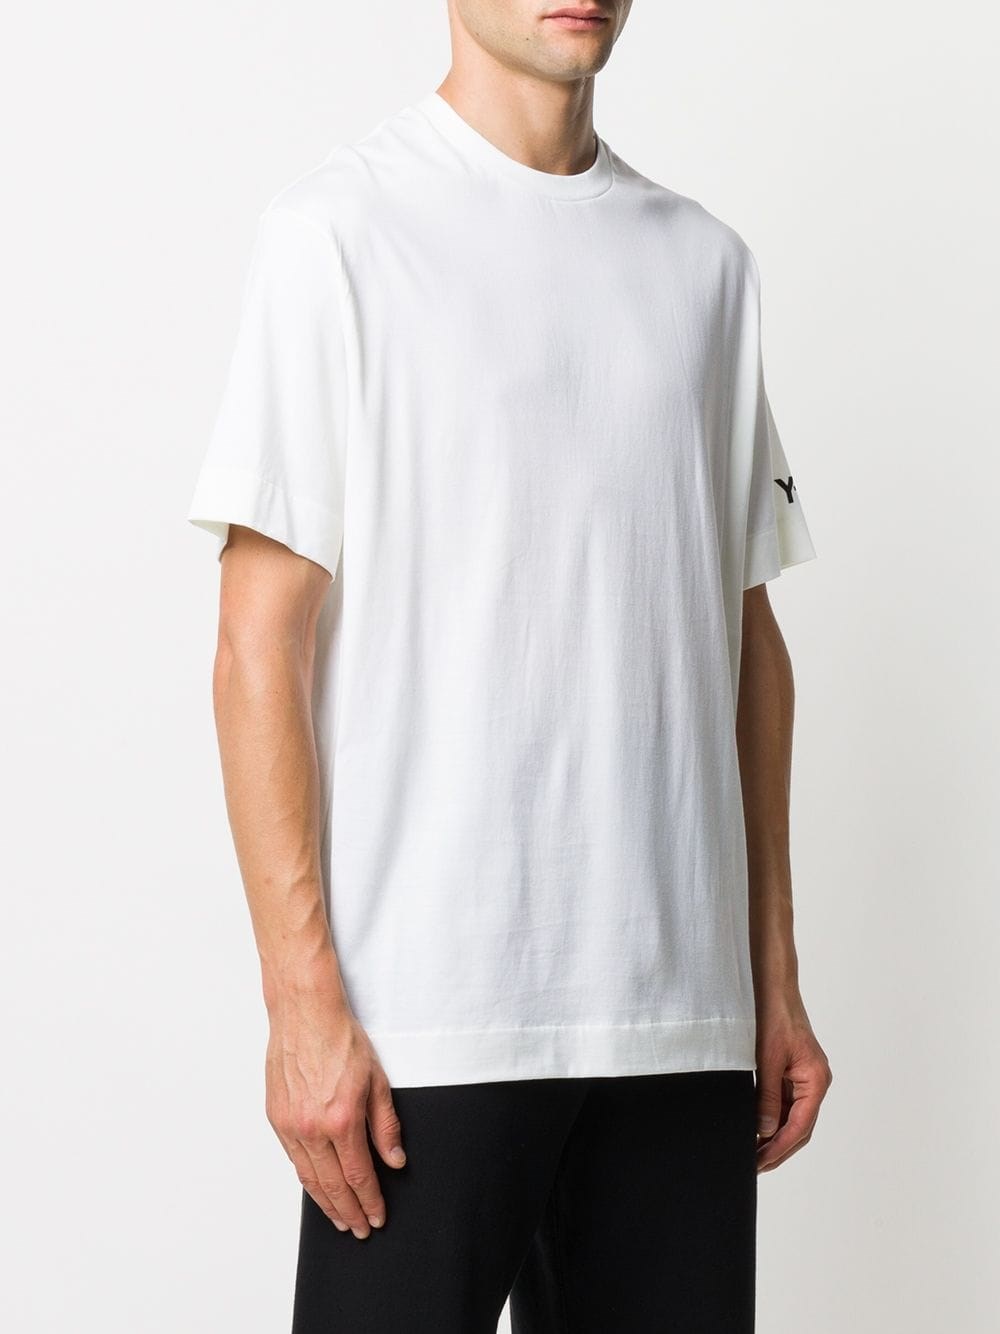 y-3 T-SHIRT available on montiboutique.com - 35991